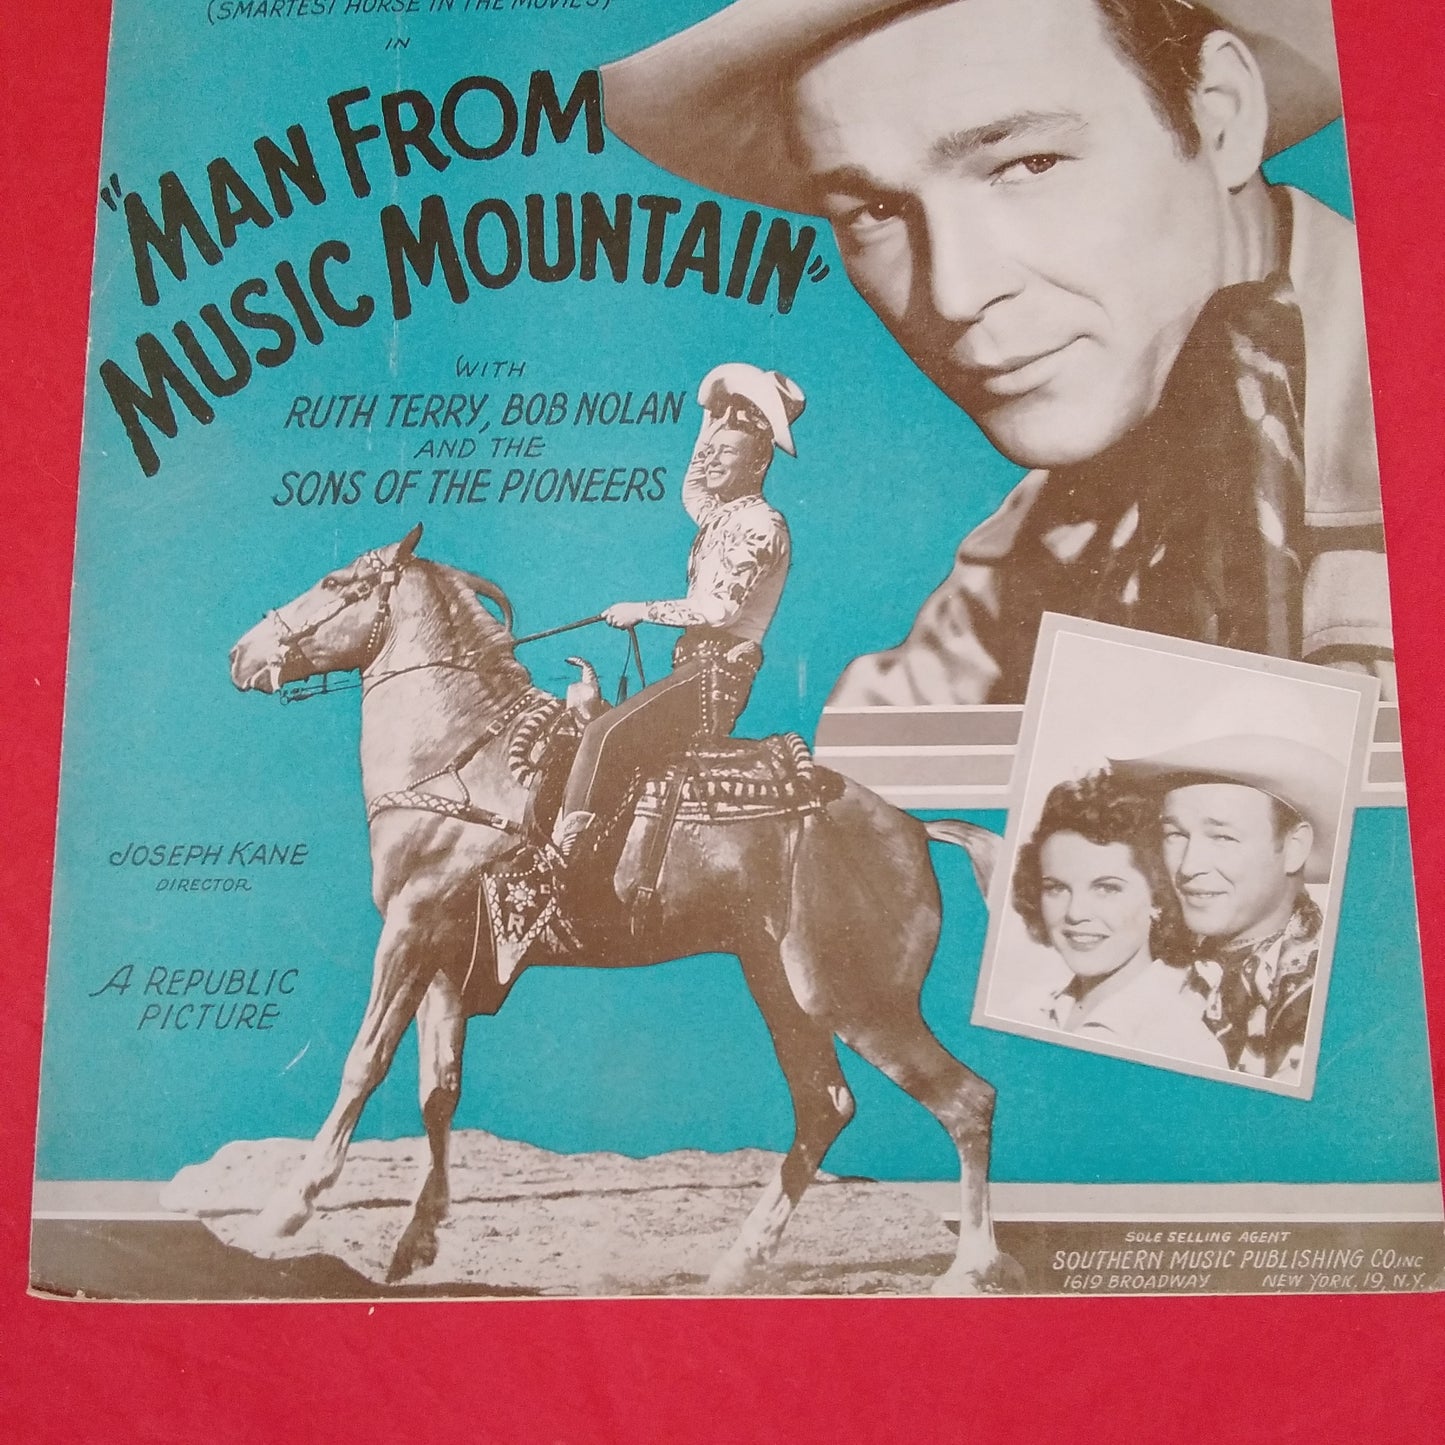 Vintage - Sheet Music "Smiles Are Made Out Of The Sunshine" Roy Rogers & Trigger in Man from Music Mountian